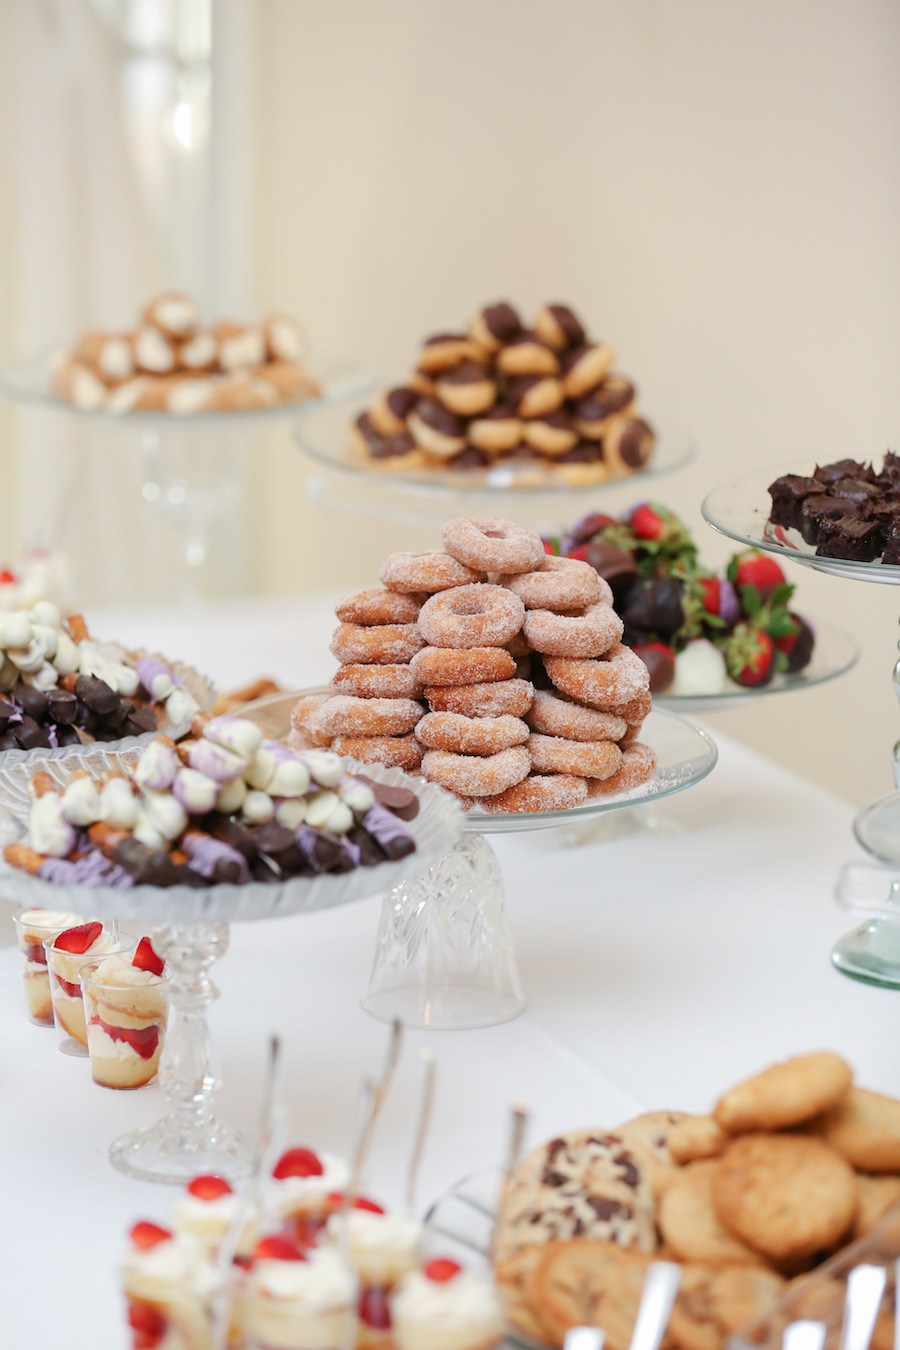 Wedding Dessert Table Favor Bar with Donuts, Cookies, Chocolate Dipped Fruit by Tampa Wedding Dessert Shop, A Piece of Cake